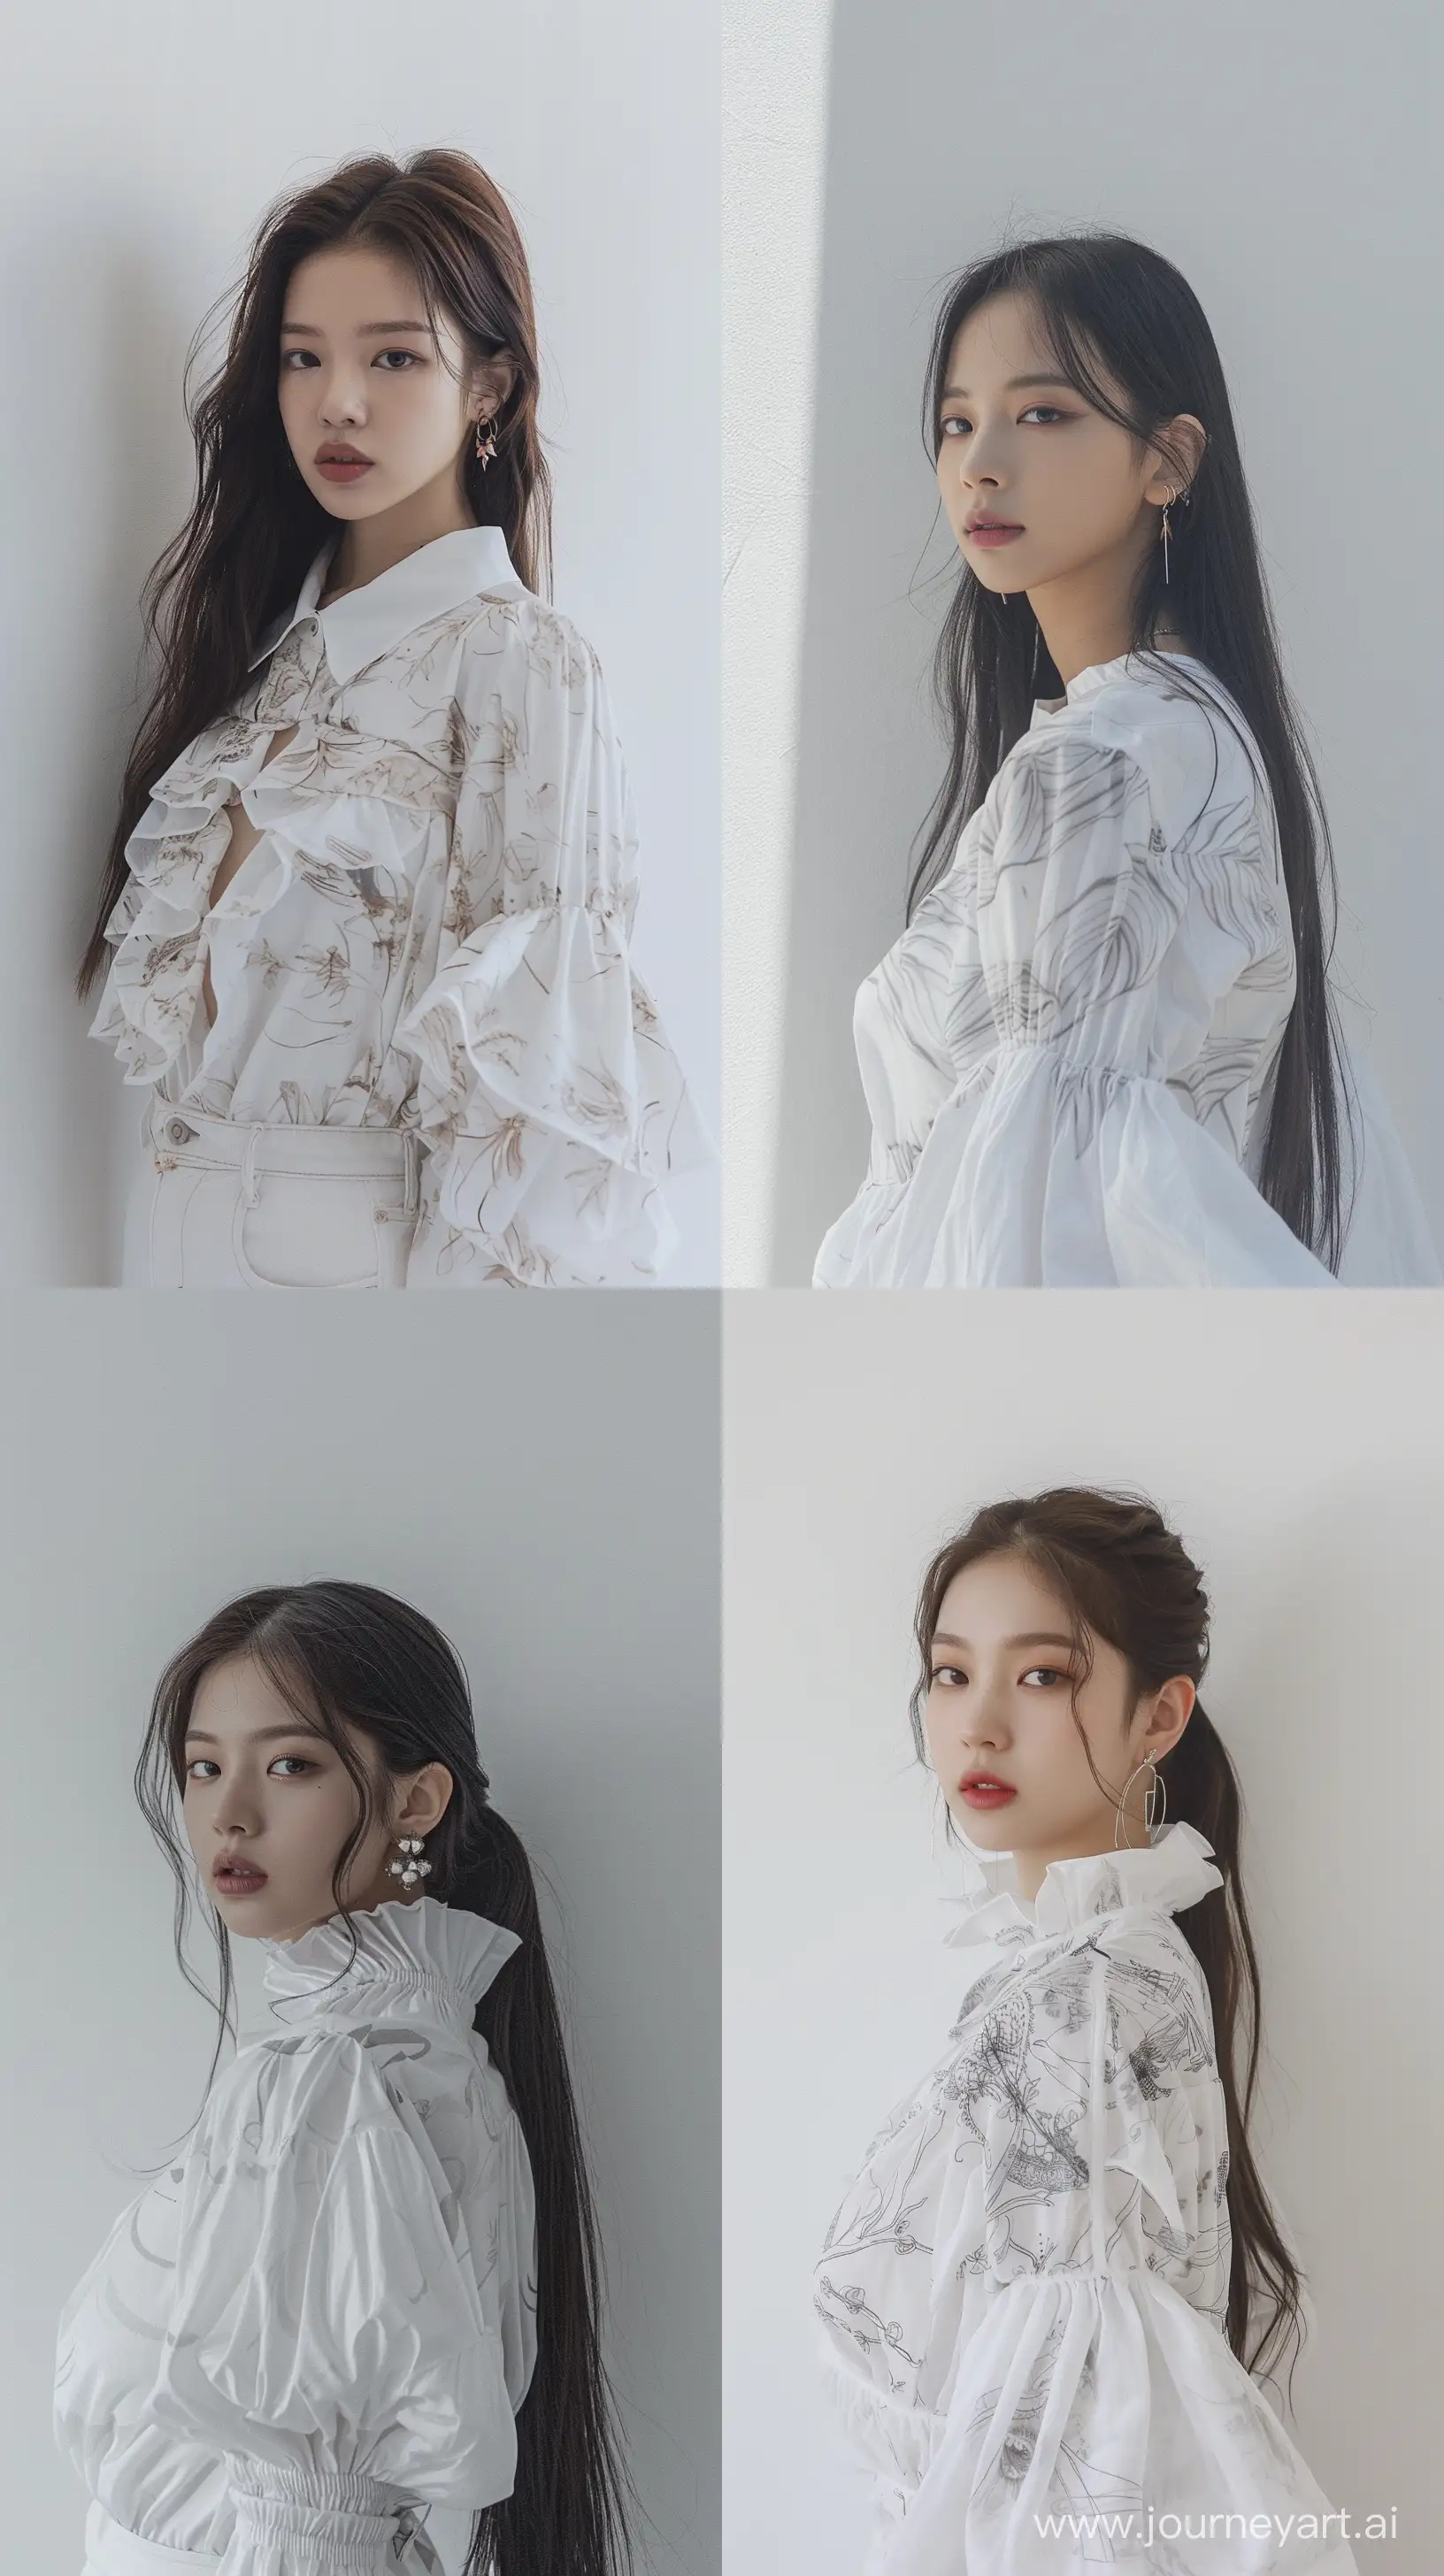 A blackpink's jennie ,wearing white oversize motived blouse, standing front of white wall,headshot,profile,and facial features resembling Blackpink's Jennie. --ar 9:16 --v 6